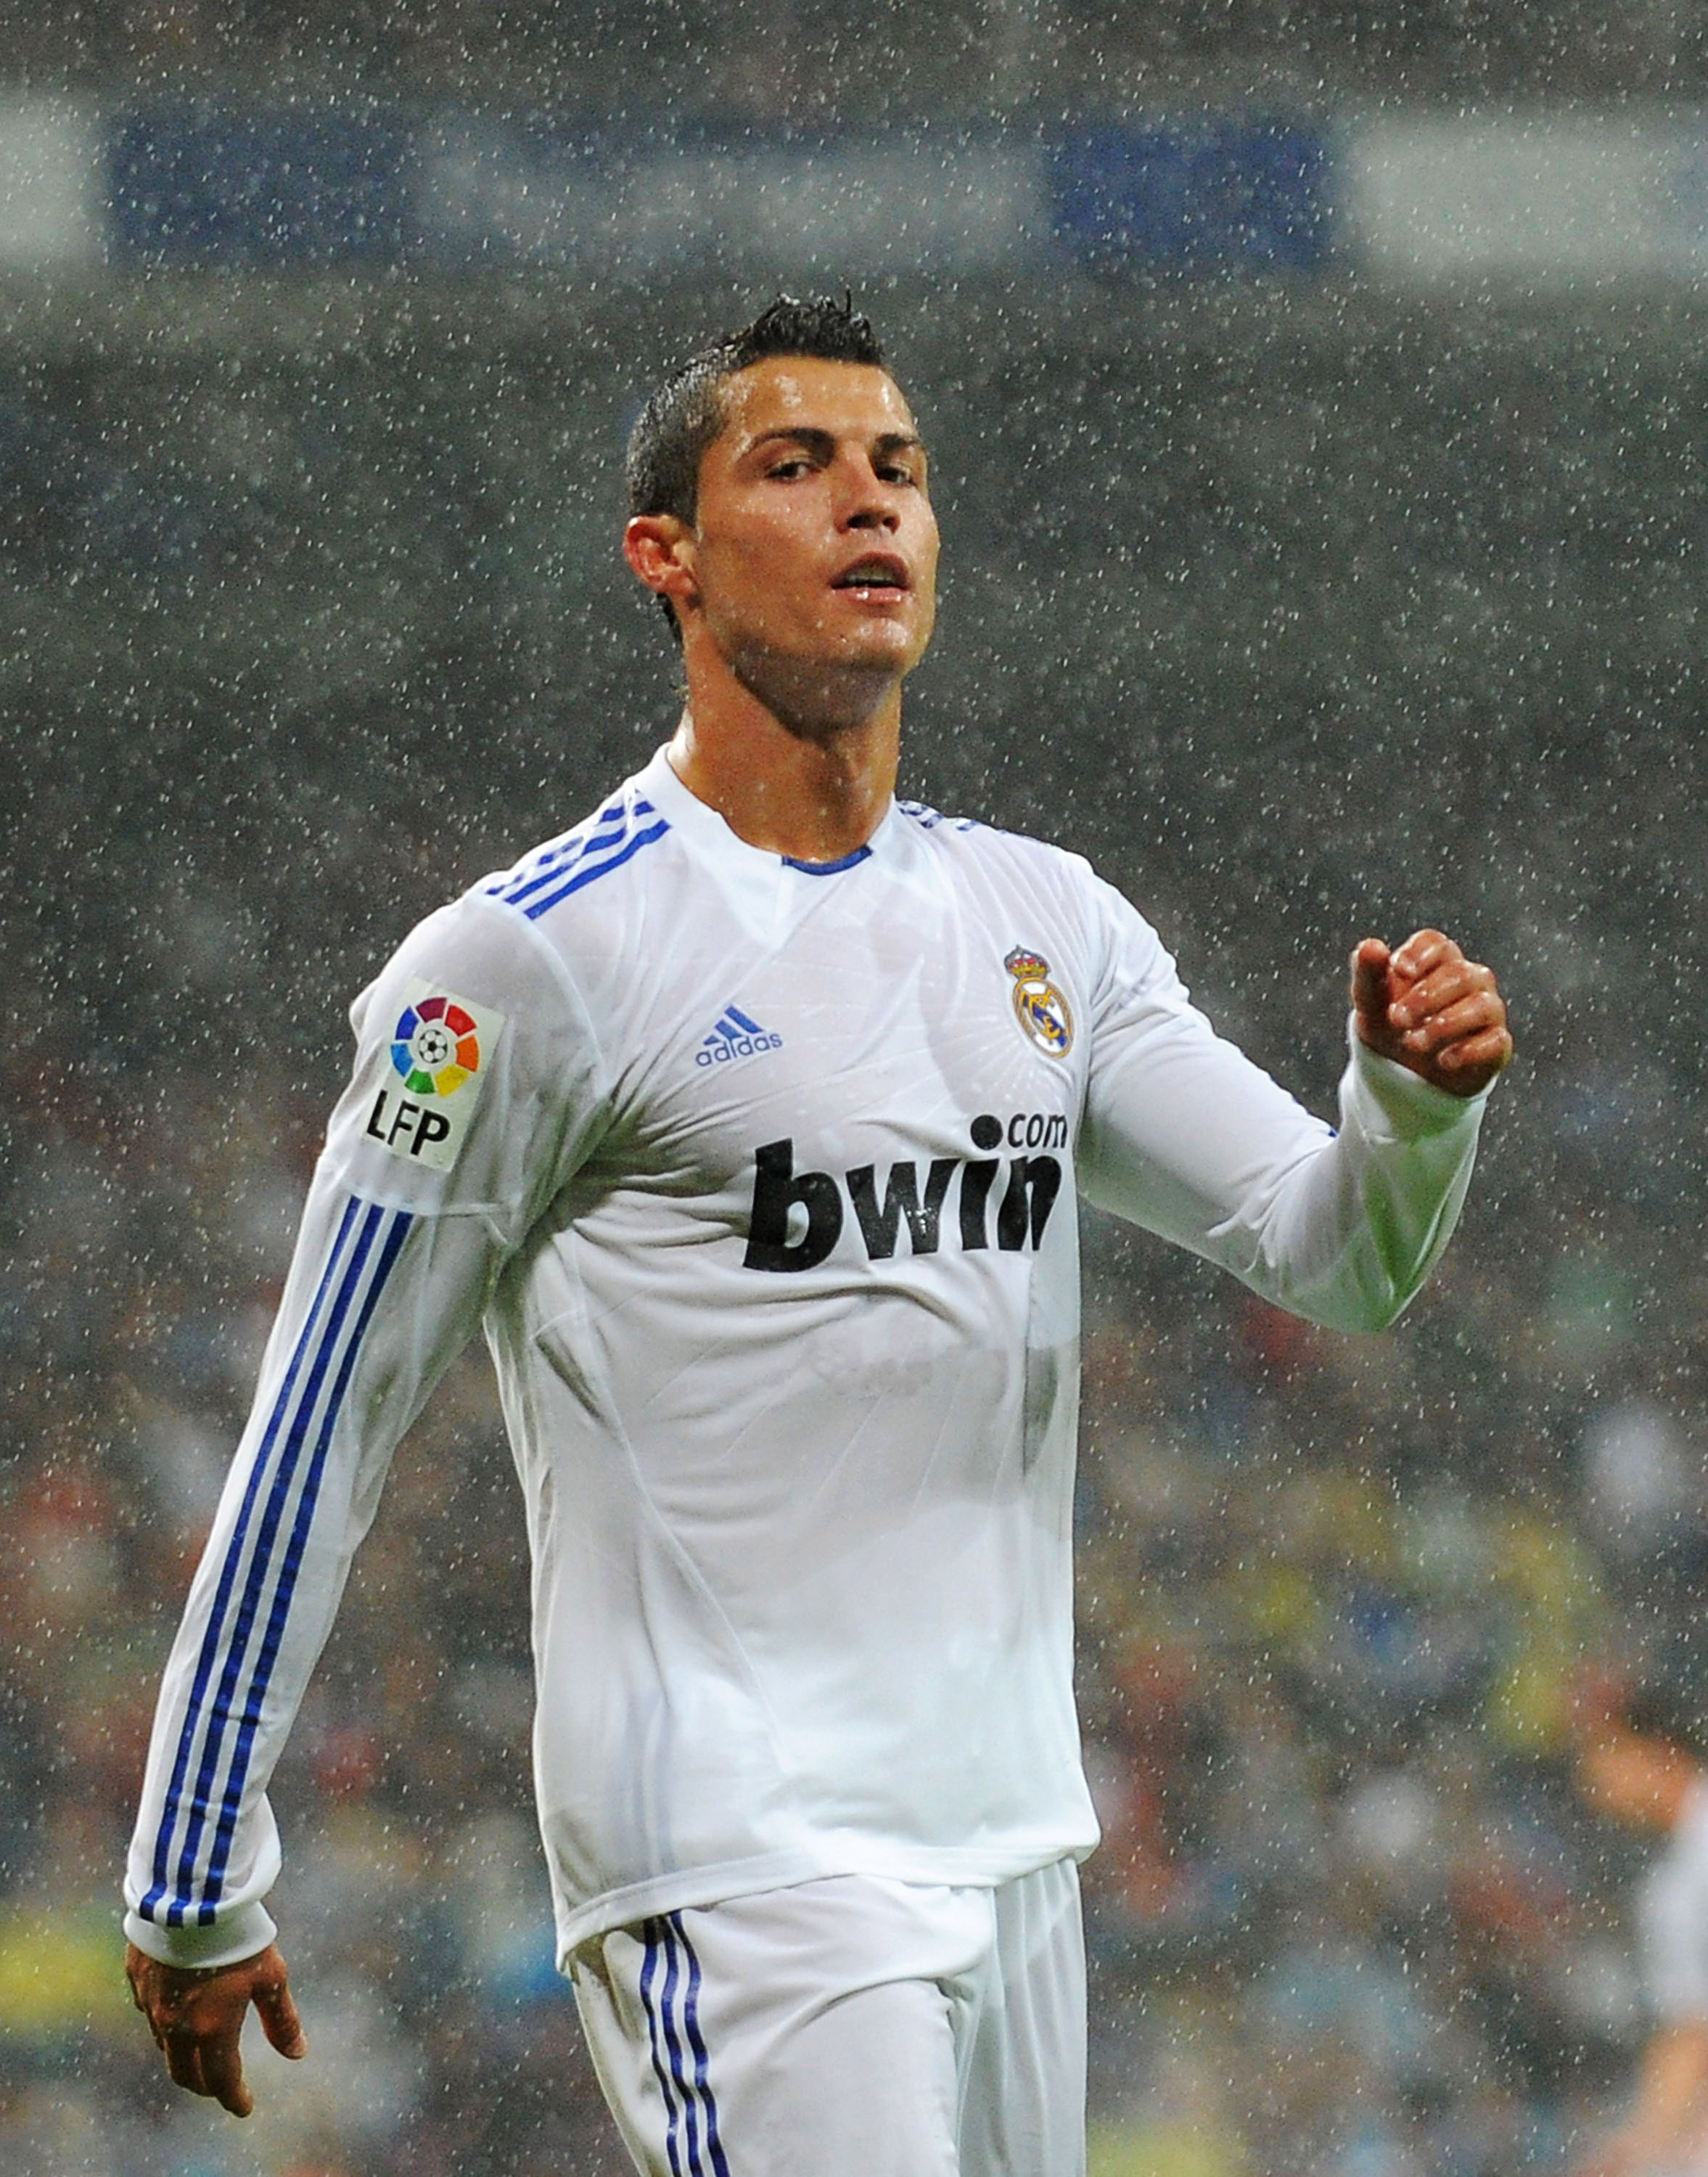 MADRID, SPAIN - OCTOBER 03:  Cristiano Ronaldo of Real Madrid waits for corner kick to be taken during their La Liga match against Deportivo La Coruna  at Estadio Santiago Bernabeu on October 3, 2010 in Madrid, Spain.  (Photo by Denis Doyle/Getty Images)